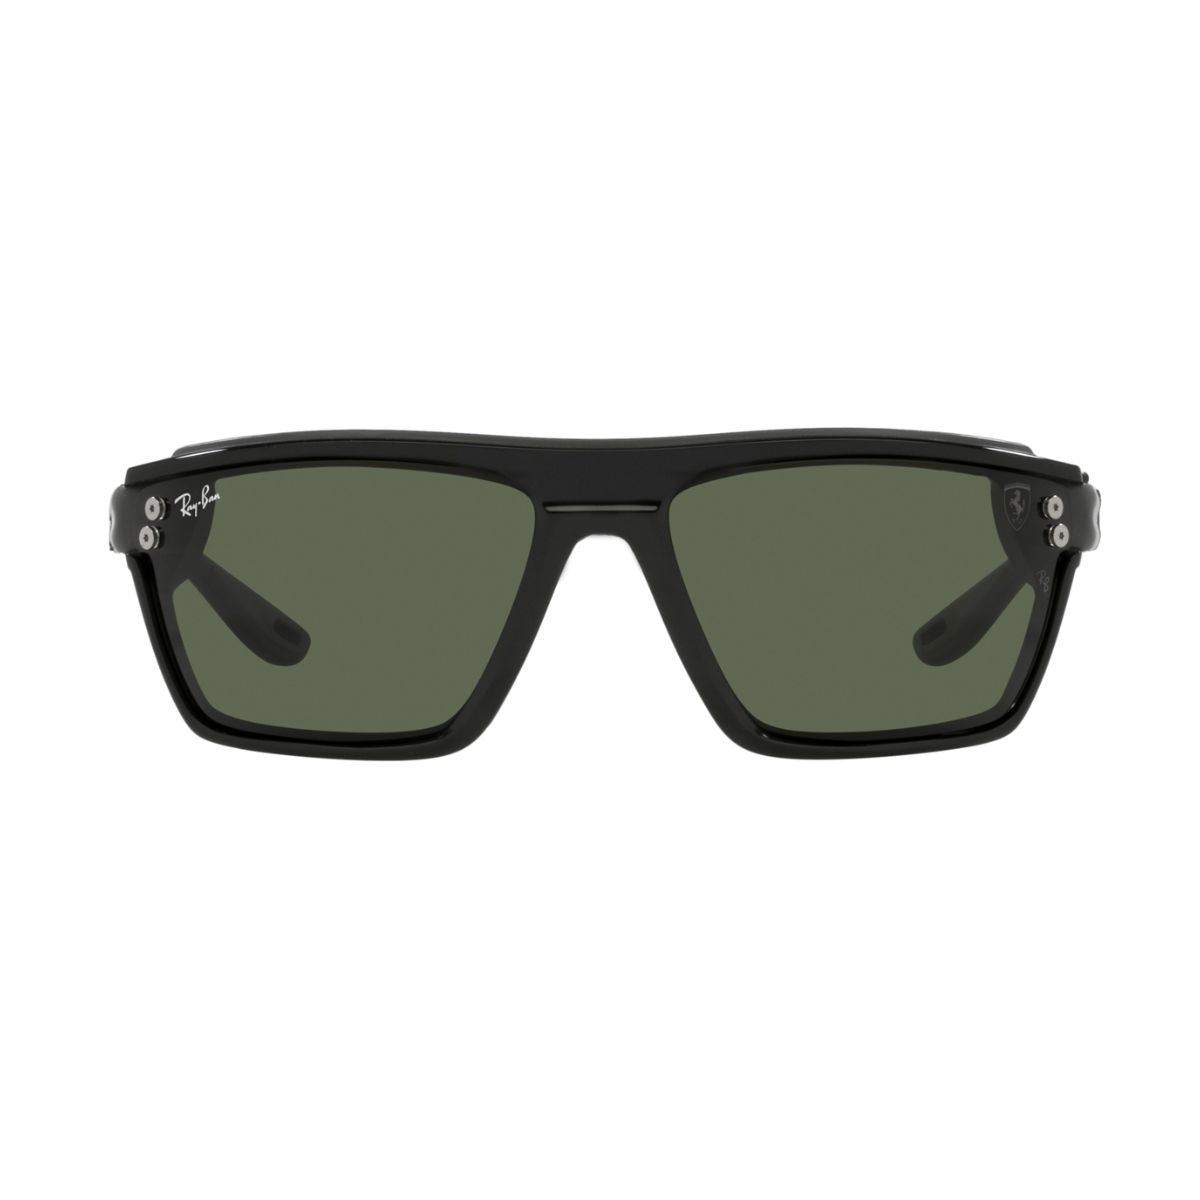 "Buy Rayban 4370 674/71 UV Protection Sunglasses For Men's Online At Optorium"